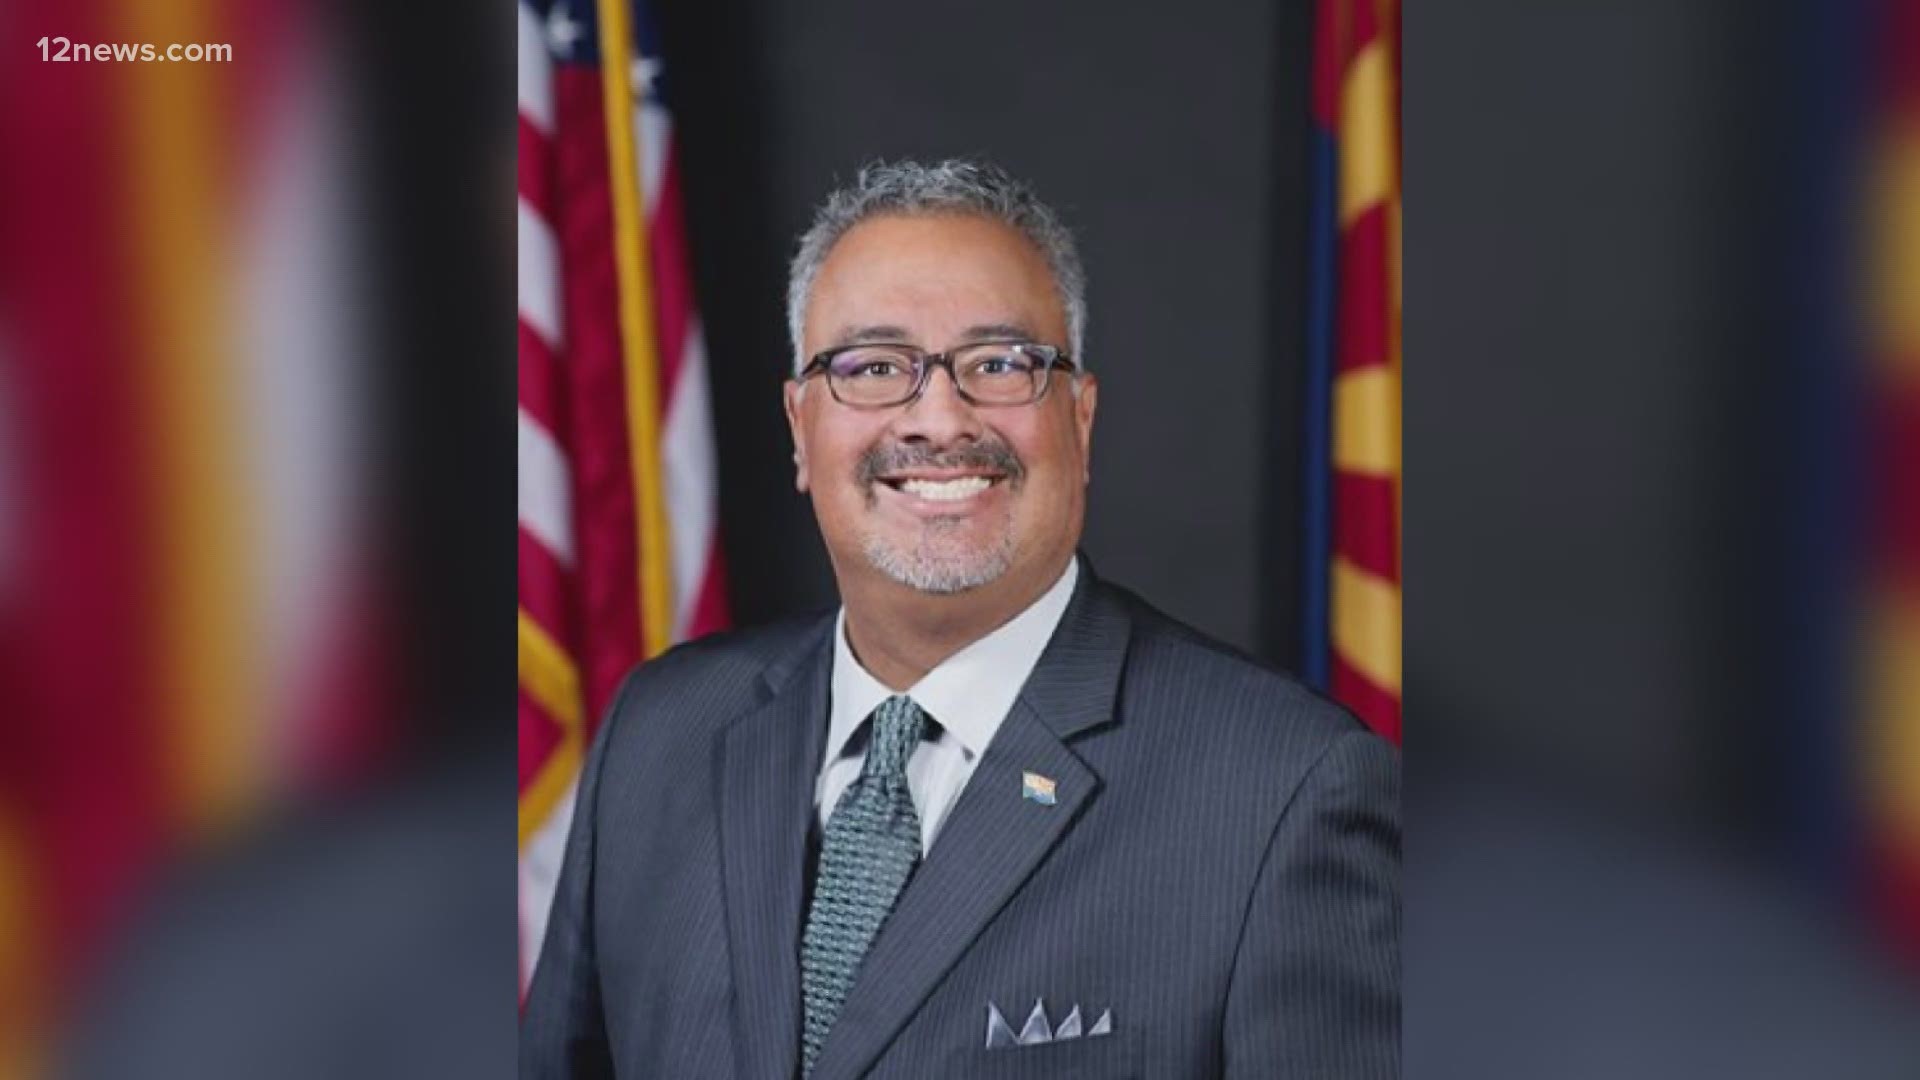 State Representative Lorenzo Sierra contracted COVID-19 on a trip to DC in September. His wife says the virus was hard on him.